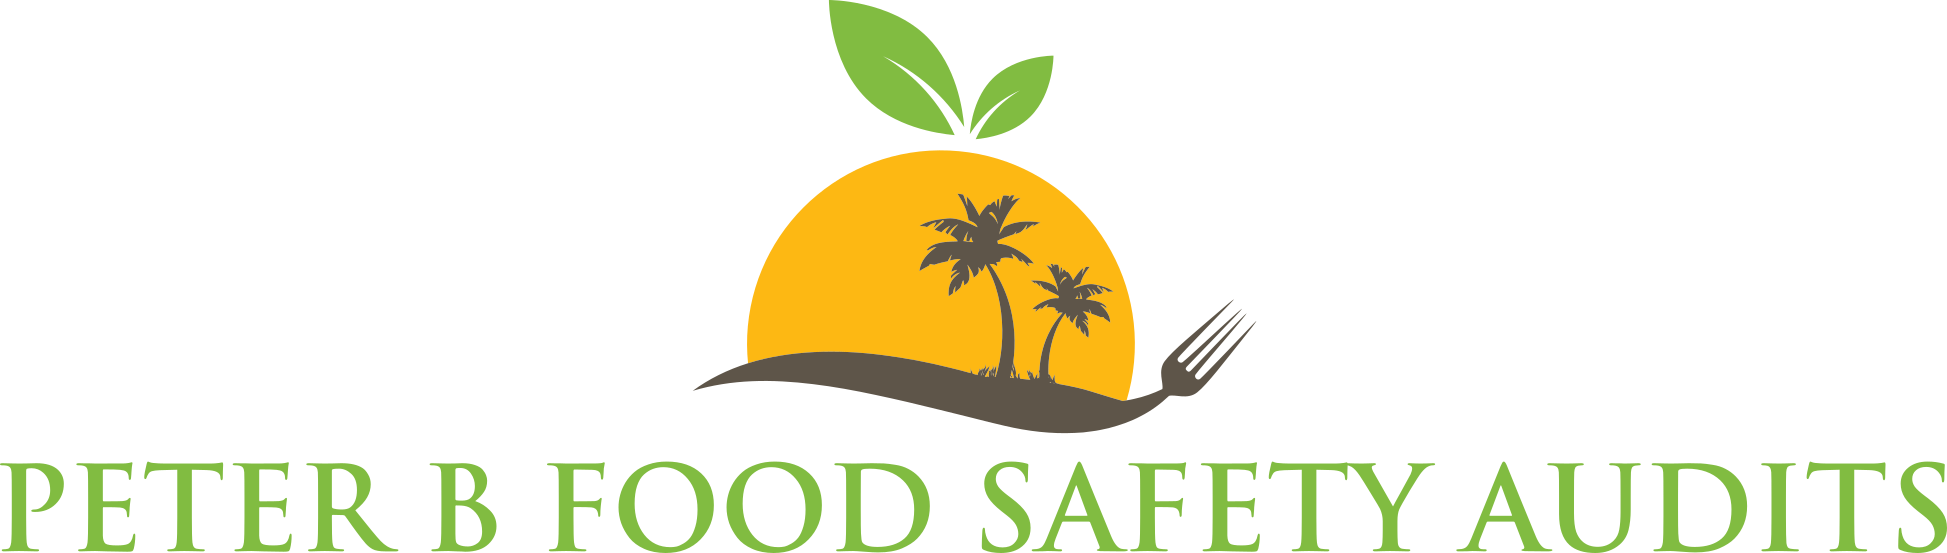 New Member Profile:  Peter B Food Safety Audits